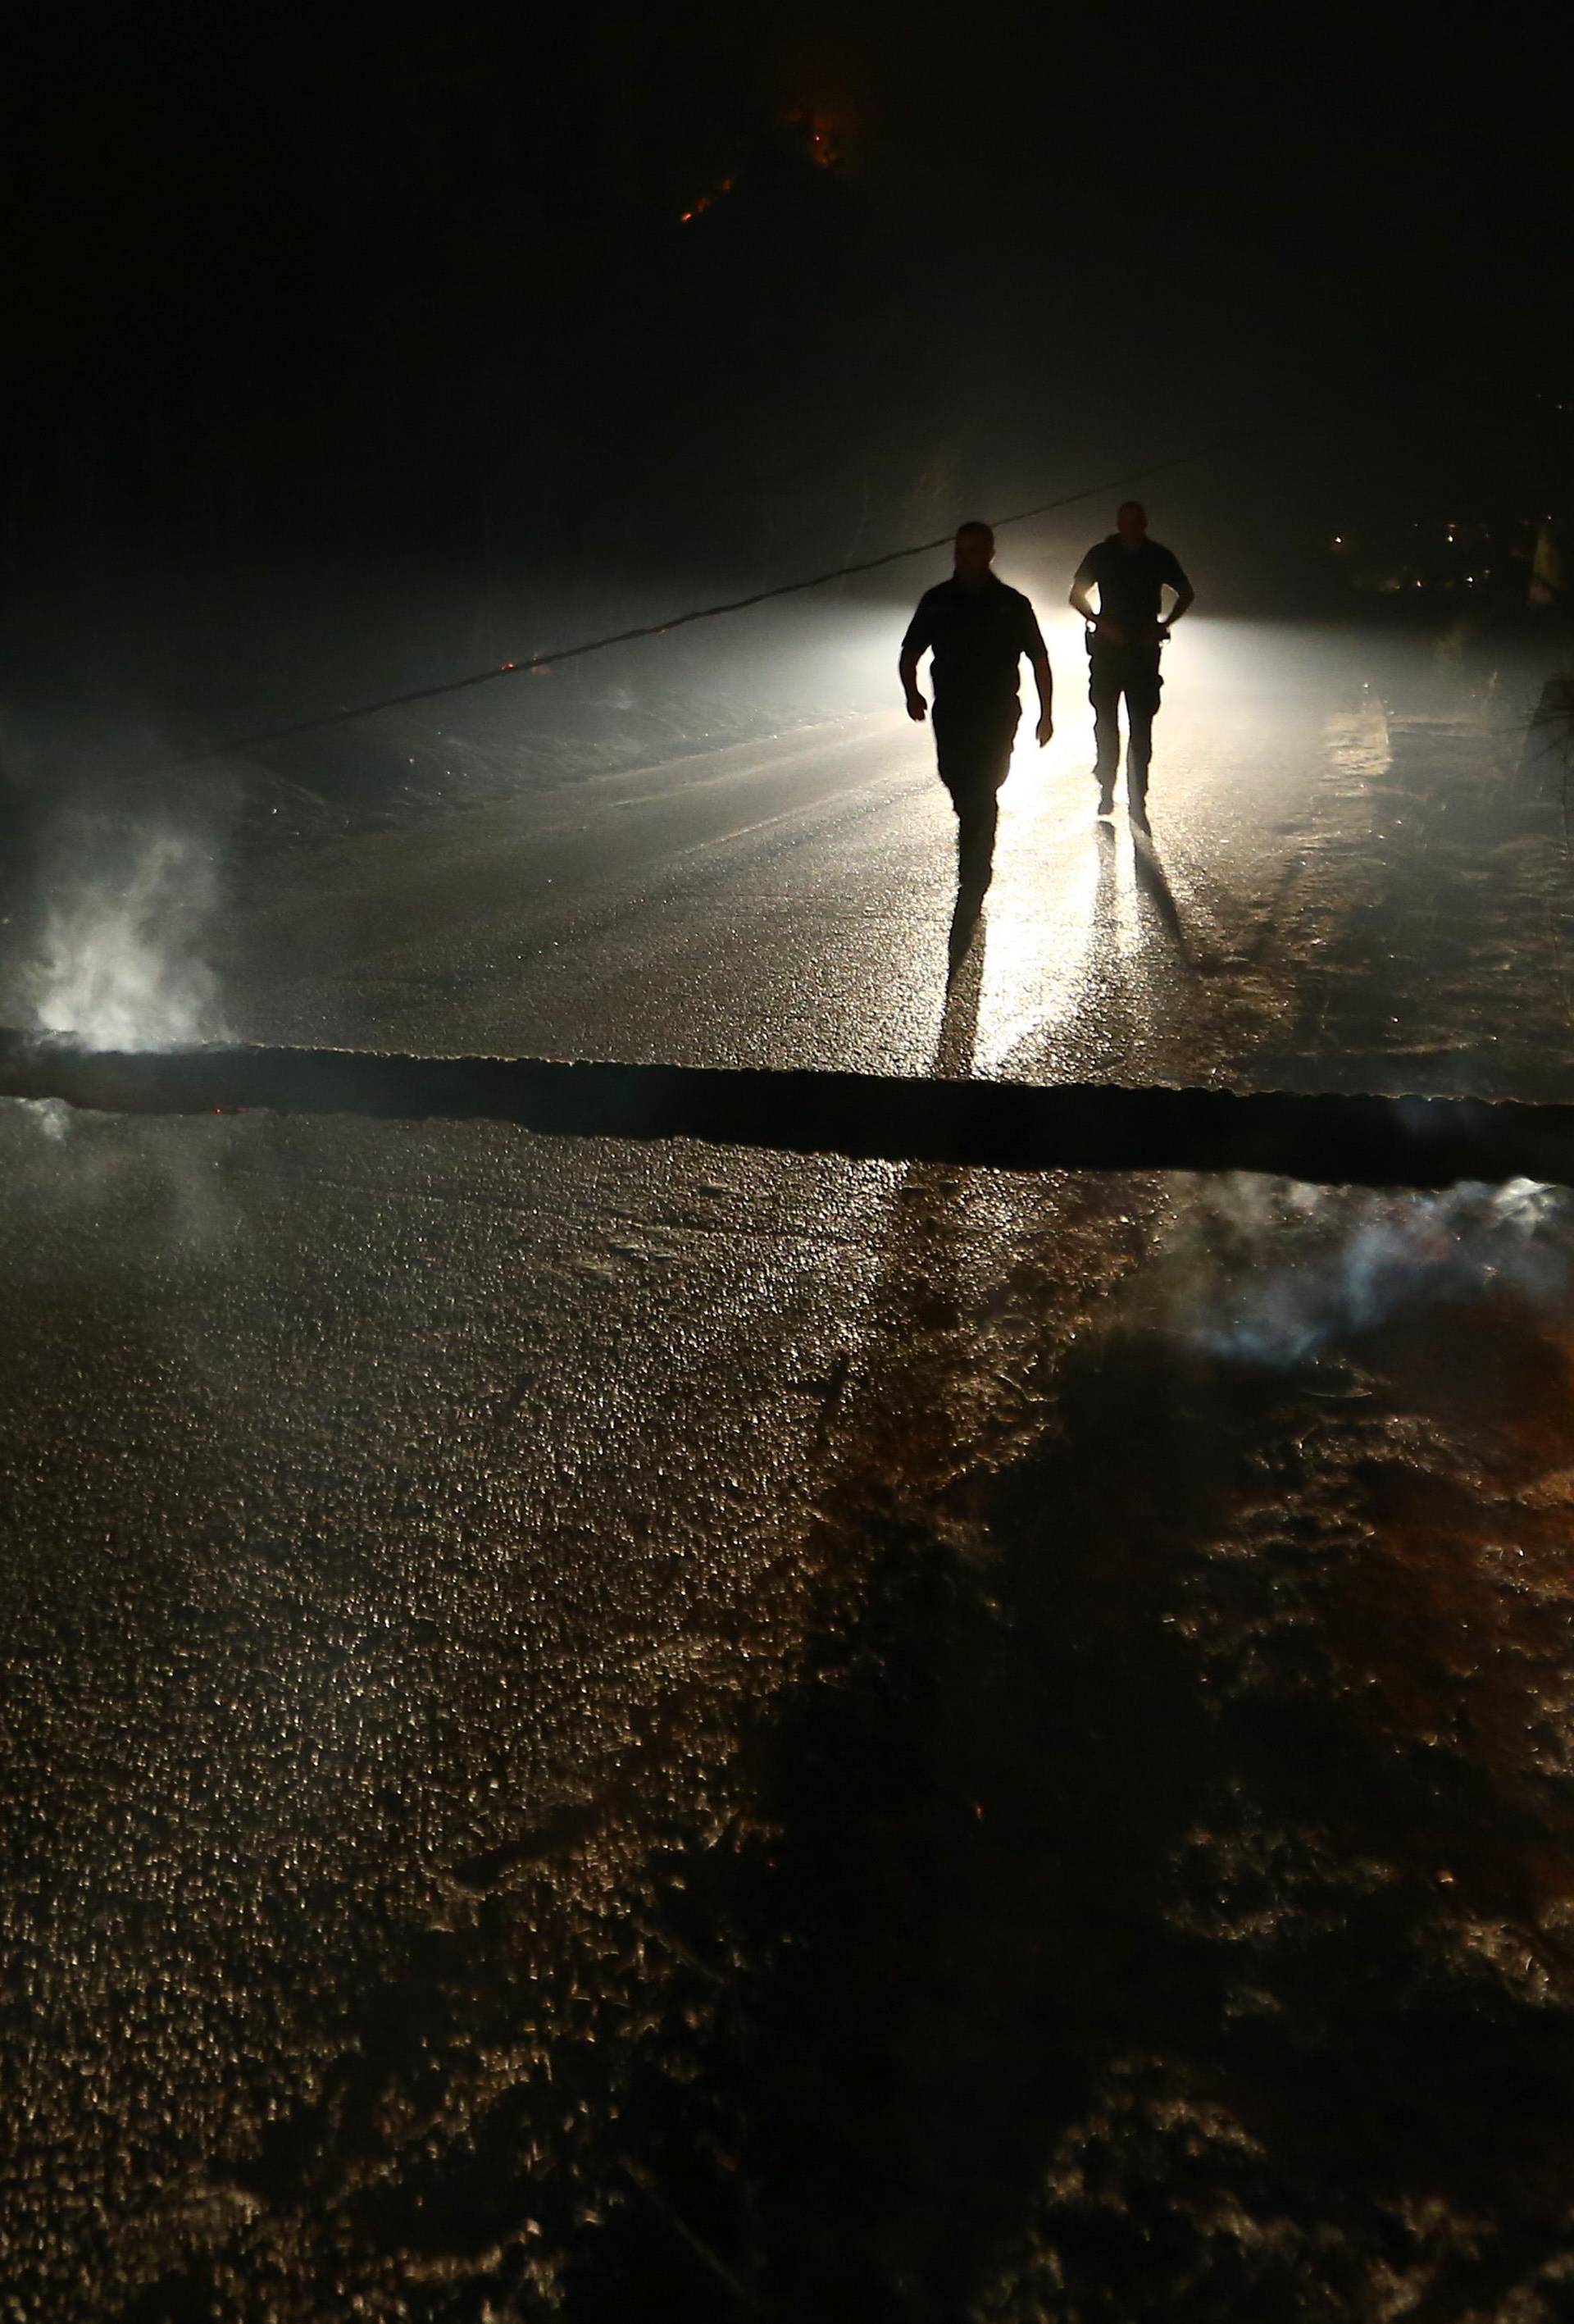 Local residents walk on the blocked road by timber,  burned by wildfire in the village of Mravince near Split